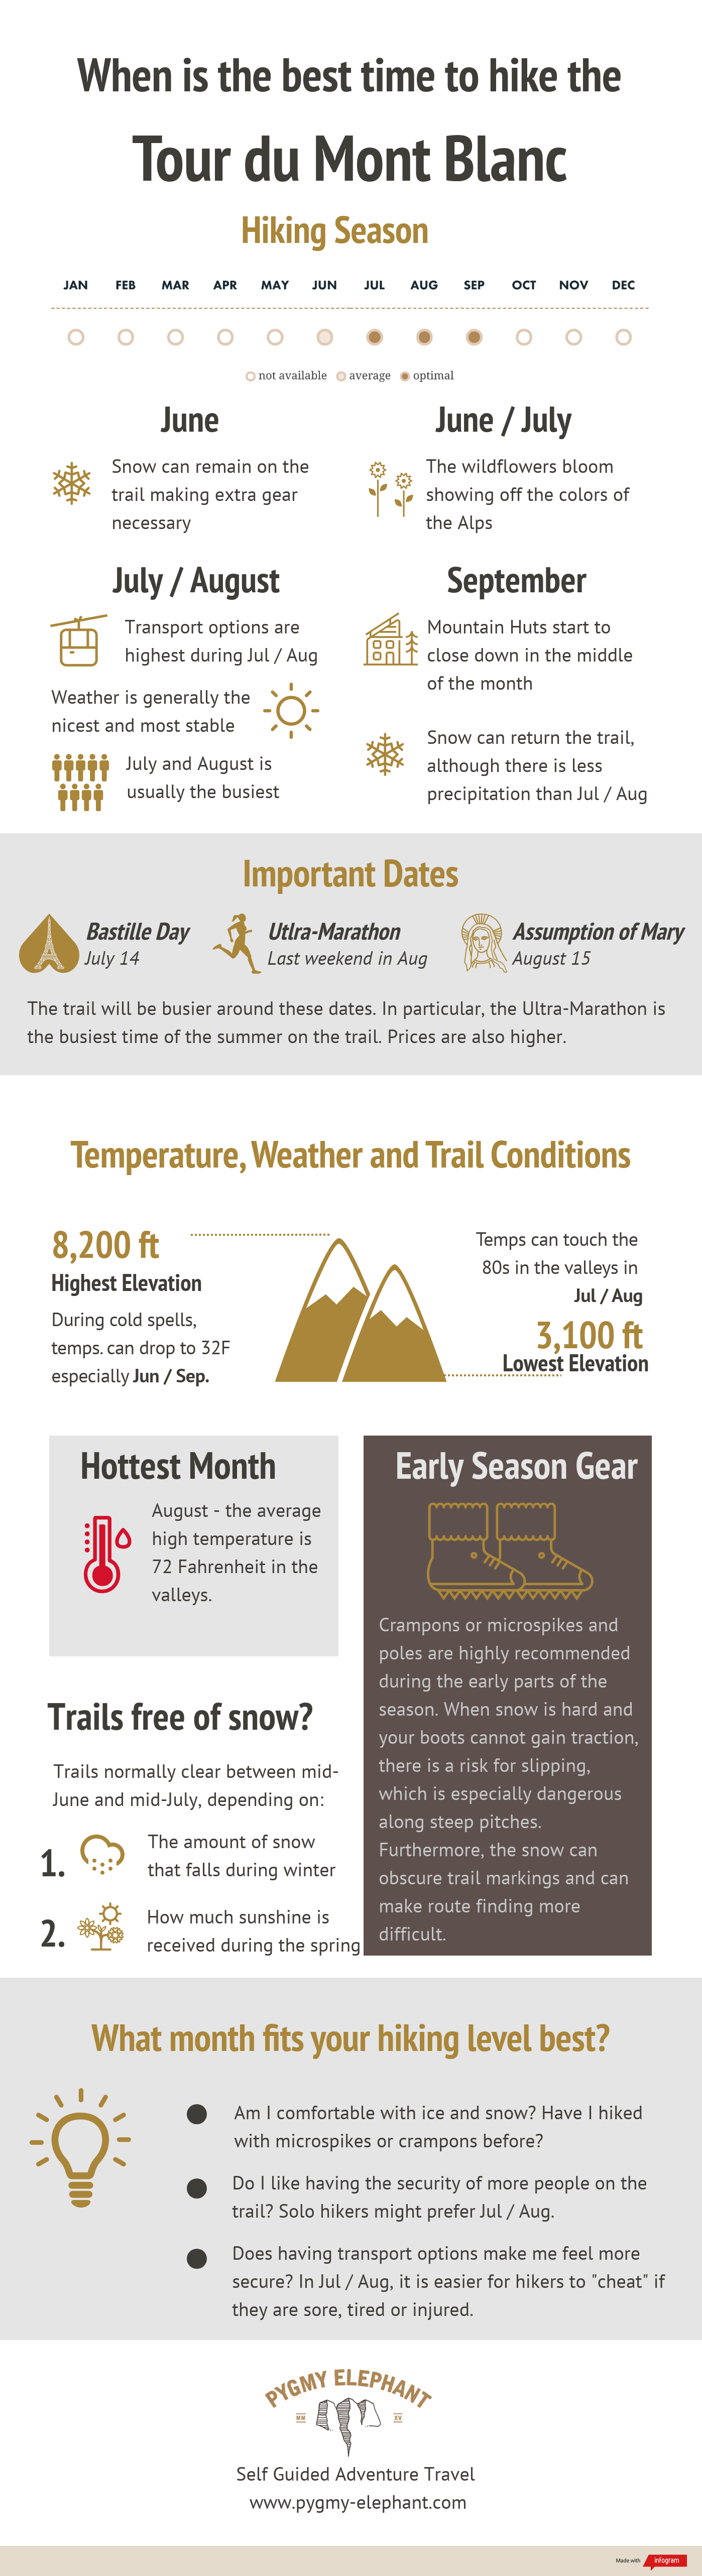 Best Time to Hike the TMB Infographic